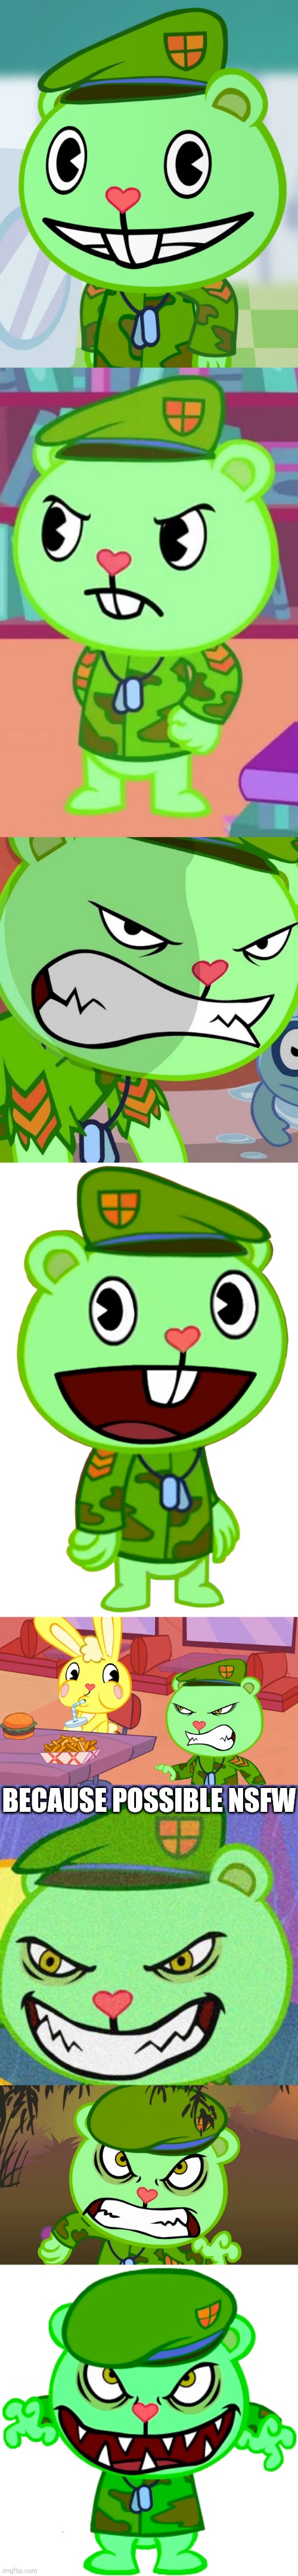 Flippy comp | BECAUSE POSSIBLE NSFW | image tagged in htf flippy,flippy happy tree friends / htf,time to die htf,mad flippy htf,flippy htf,angry flippy htf | made w/ Imgflip meme maker